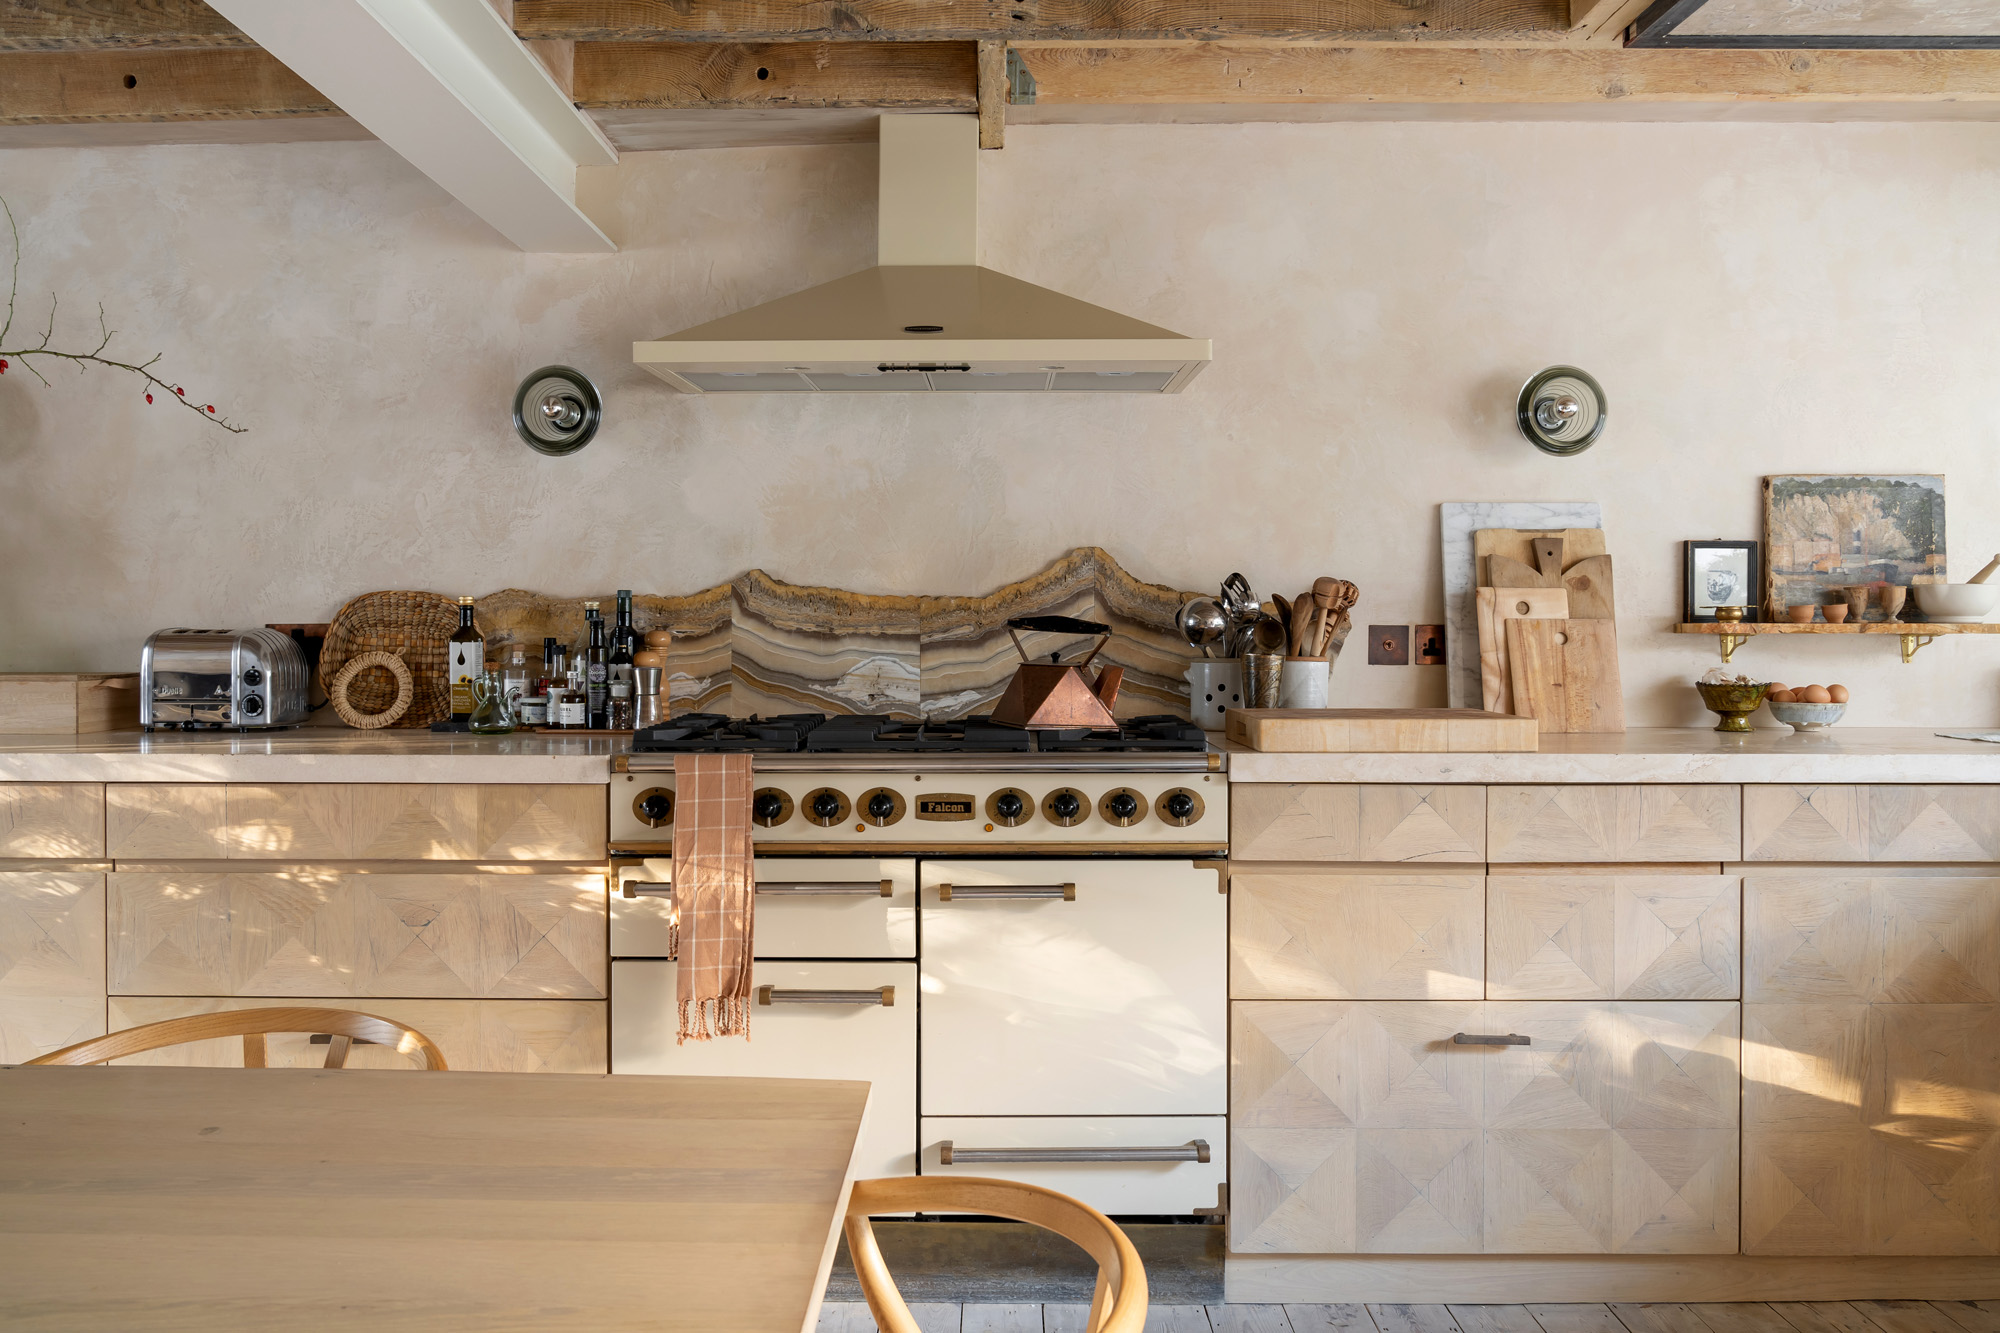 Kitchen by Retrouvius - salvage and upcycling interior design studio in London